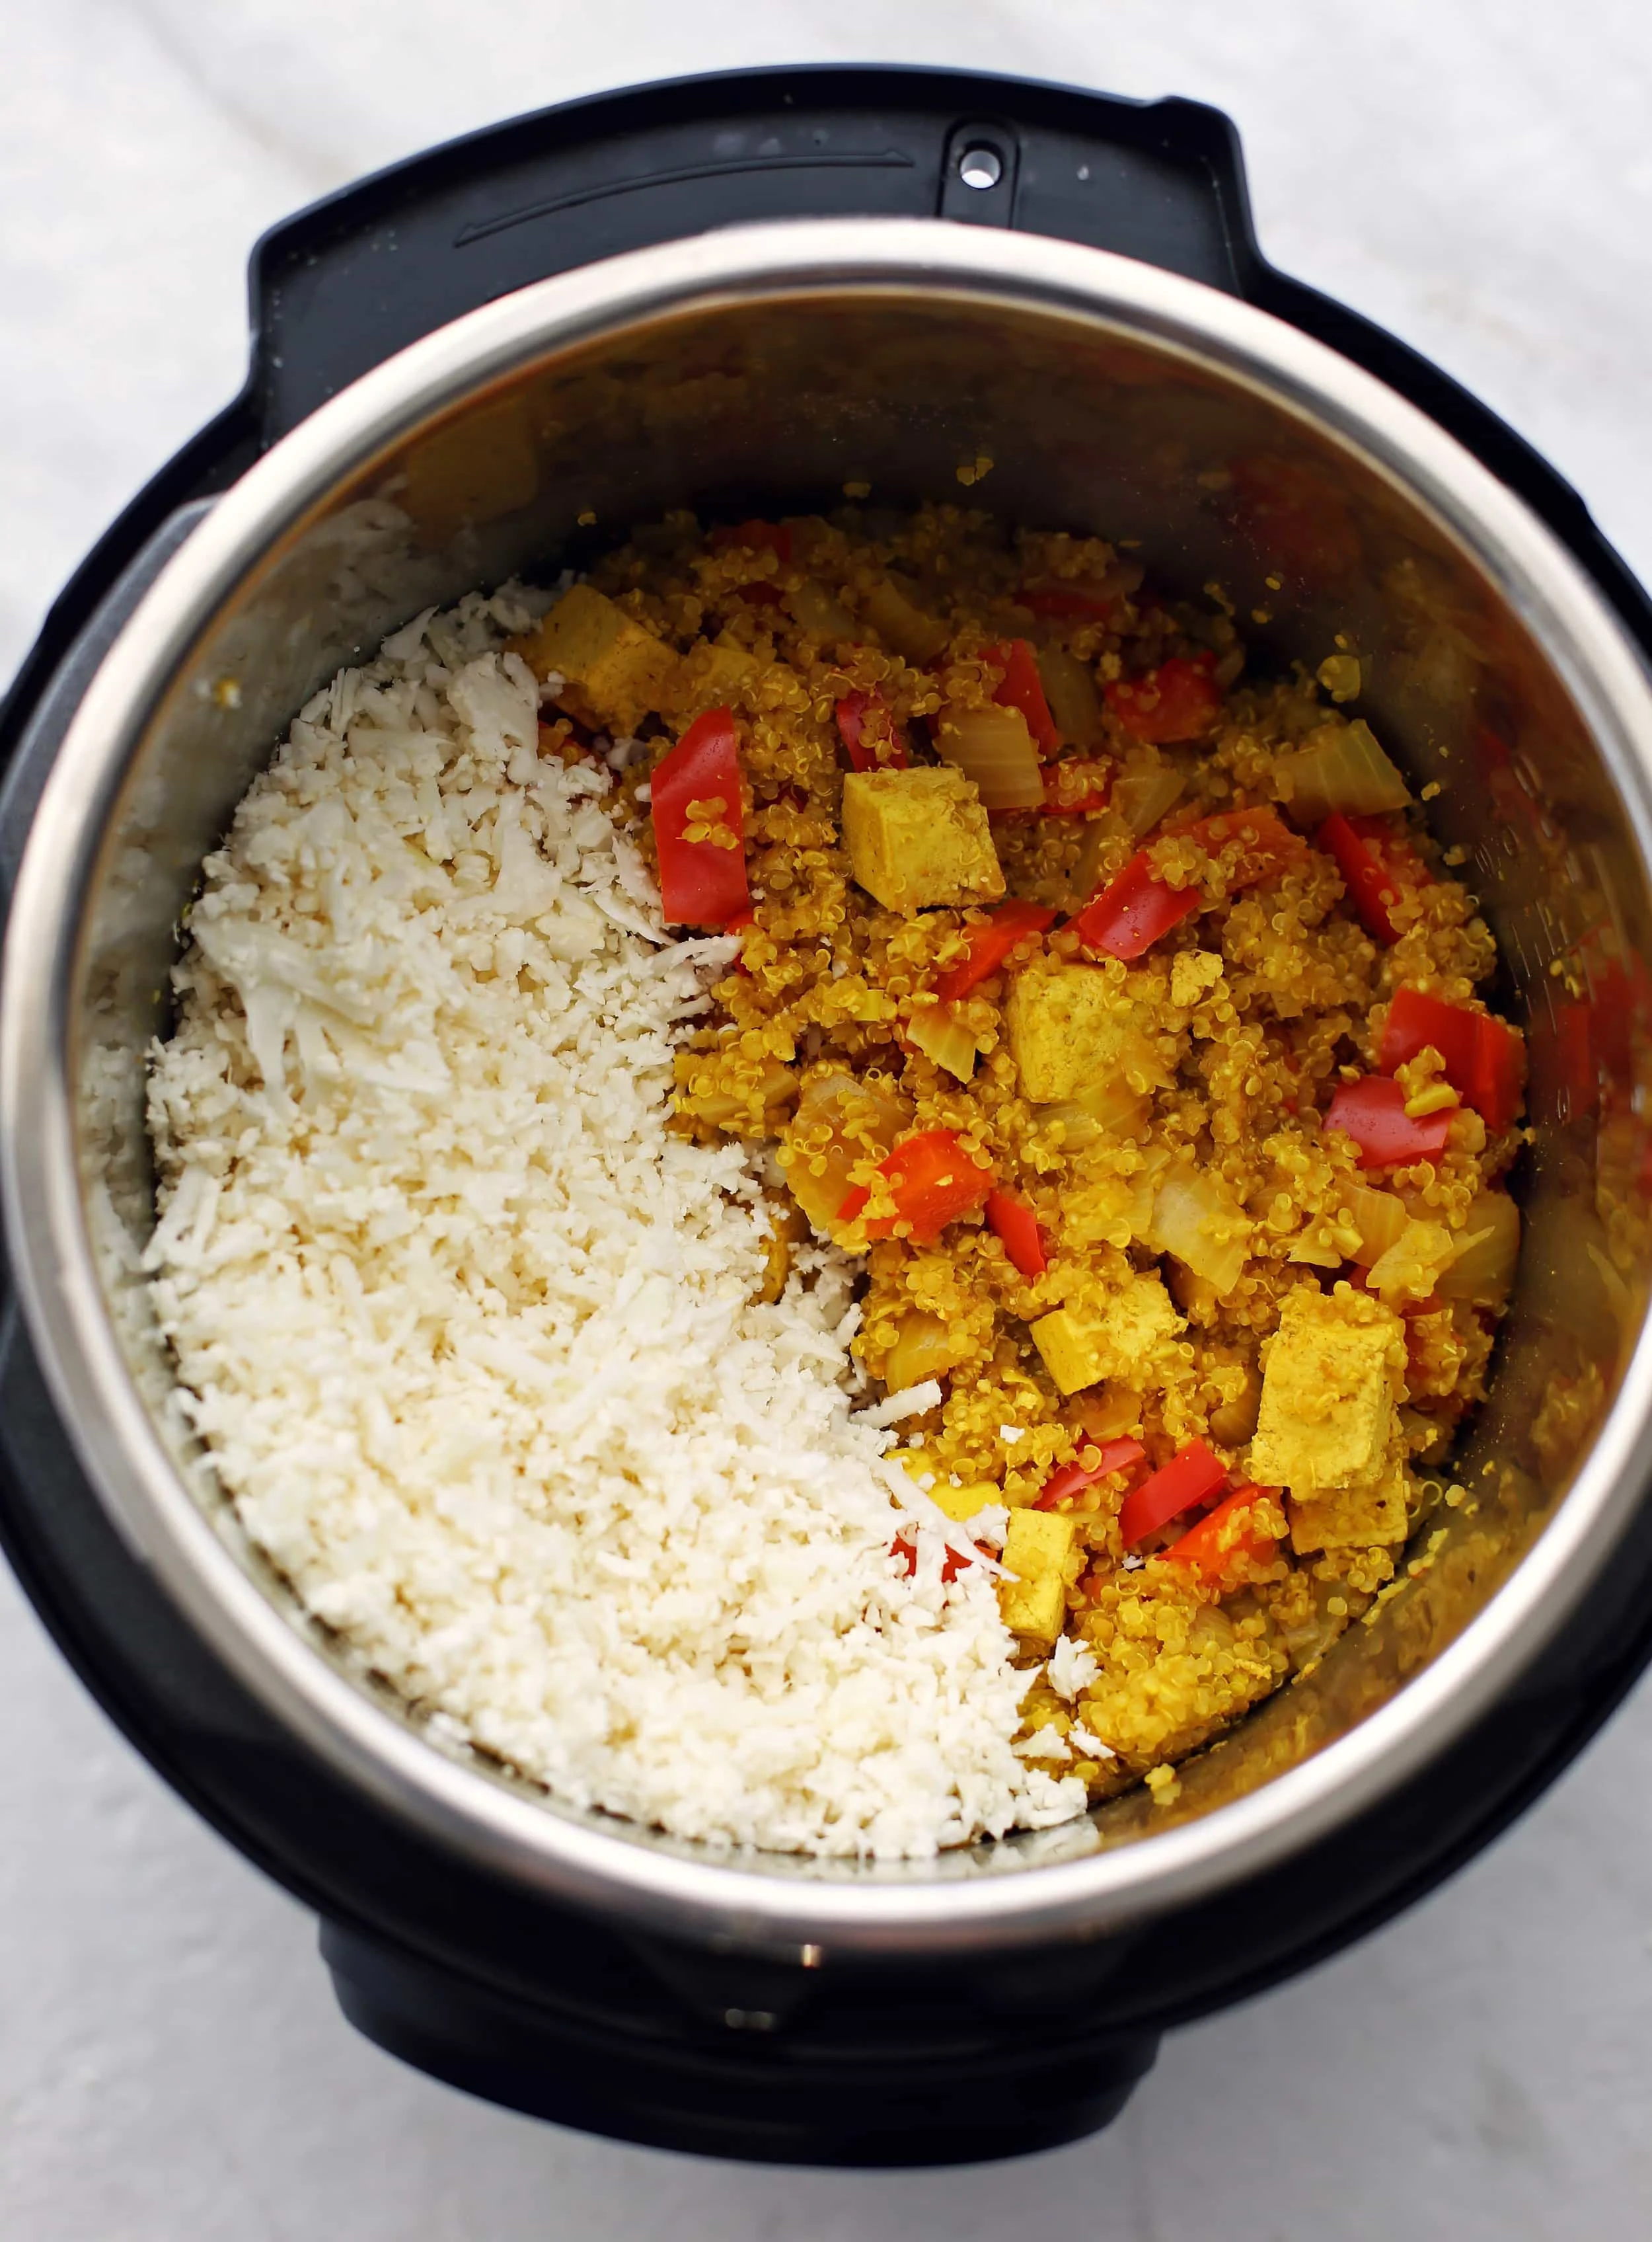 Cooked spiced quinoa, tofu, and bell peppers with cauliflower rice in the Instant Pot.